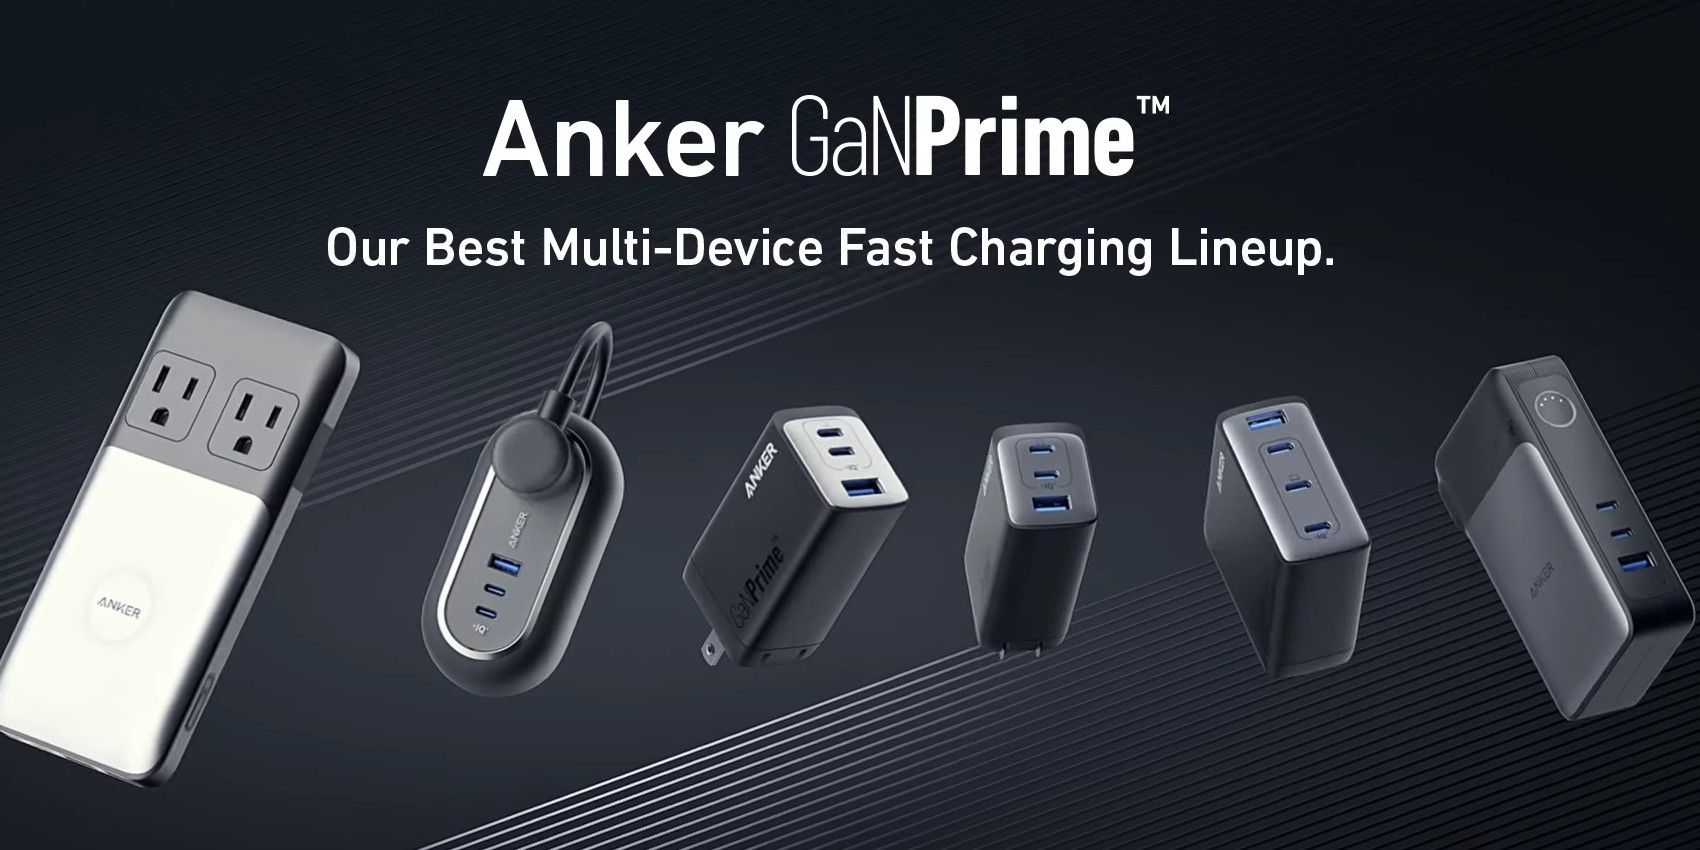 Anker's New GaNPrime Chargers Offer Faster And Smarter Charging